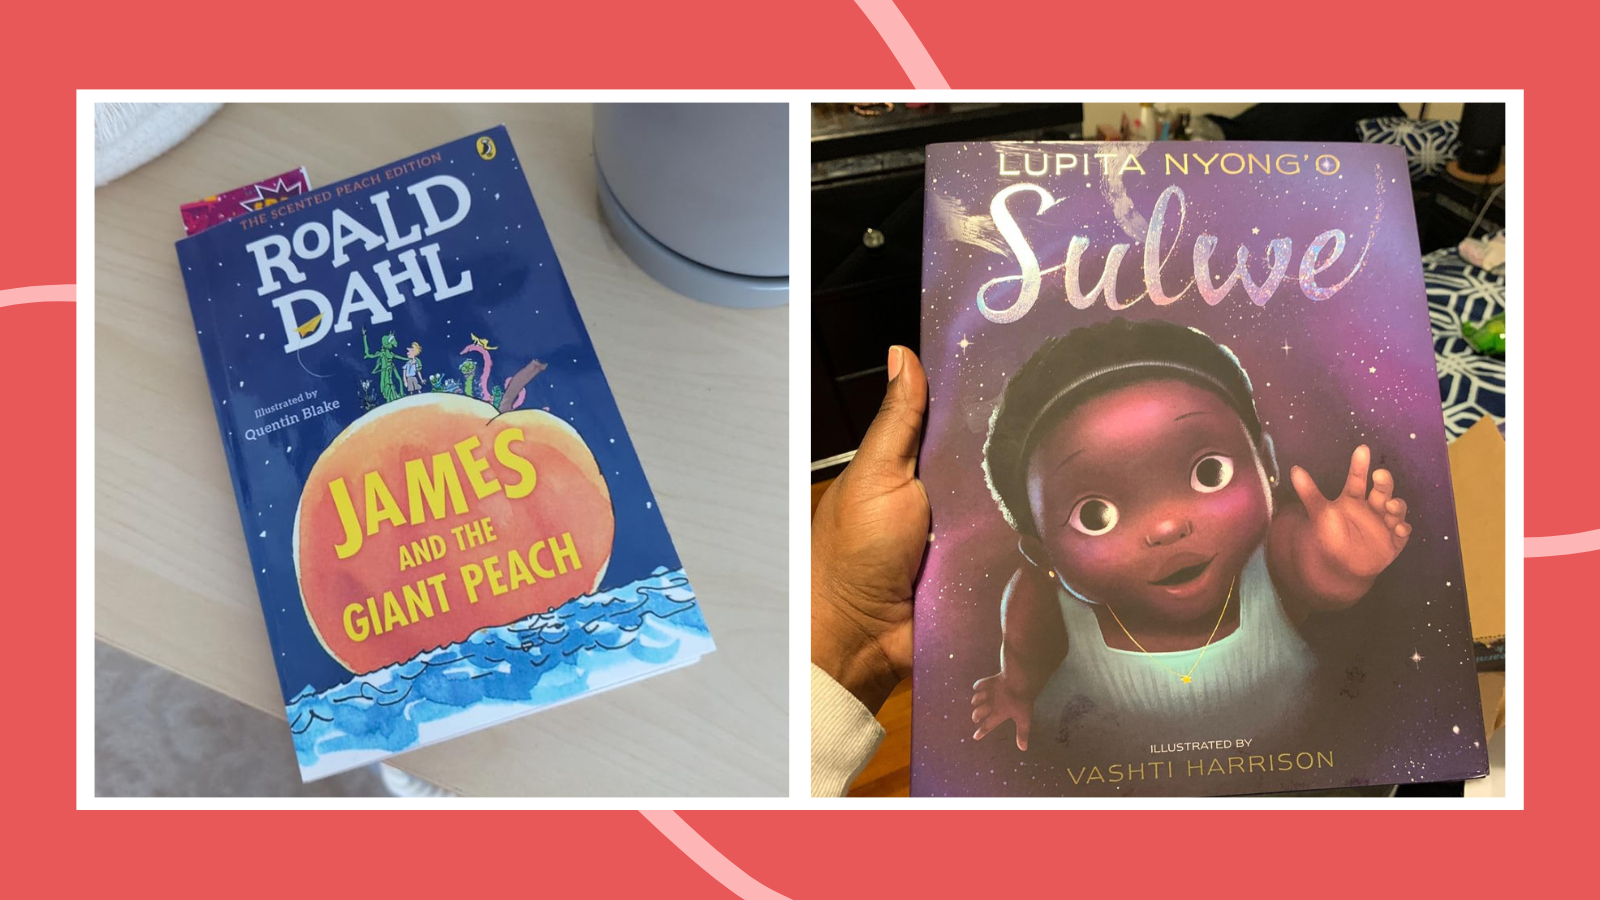 Examples of banned children's books including James and the Giant Peach and Sulwe.